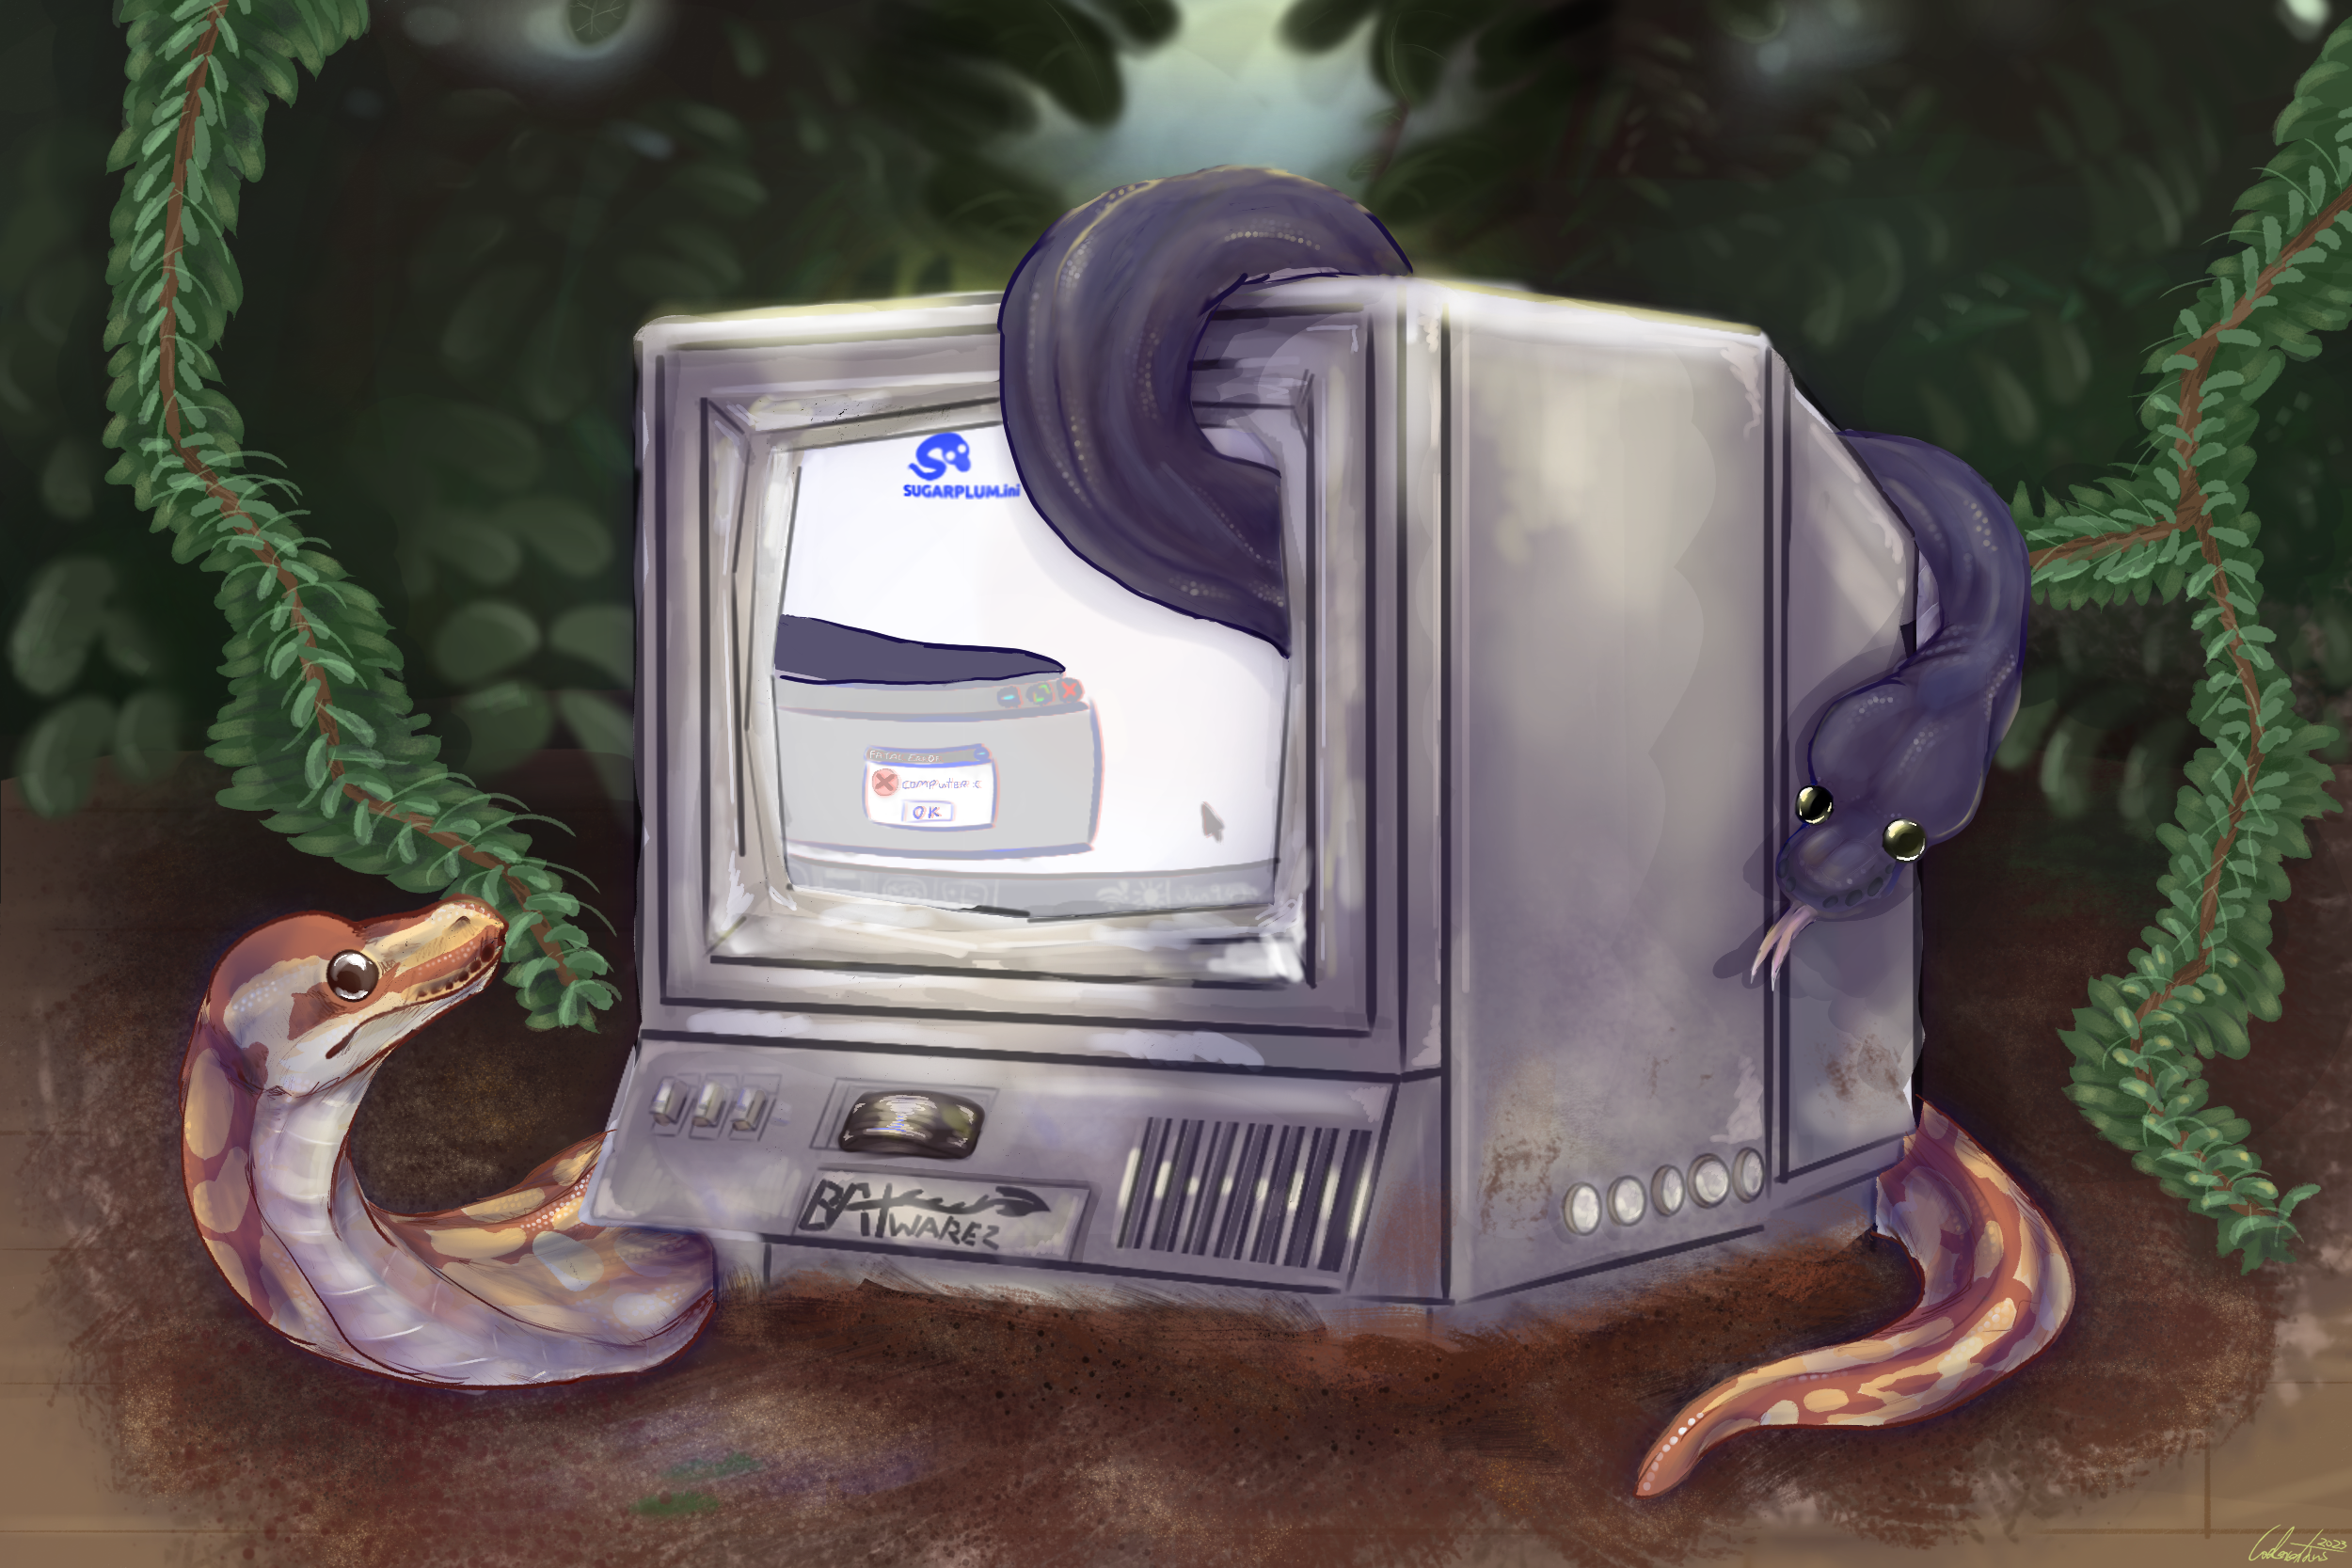 A drawing of two ball pythons surrounding a CRT monitor in the dirt. There's plants in the background.